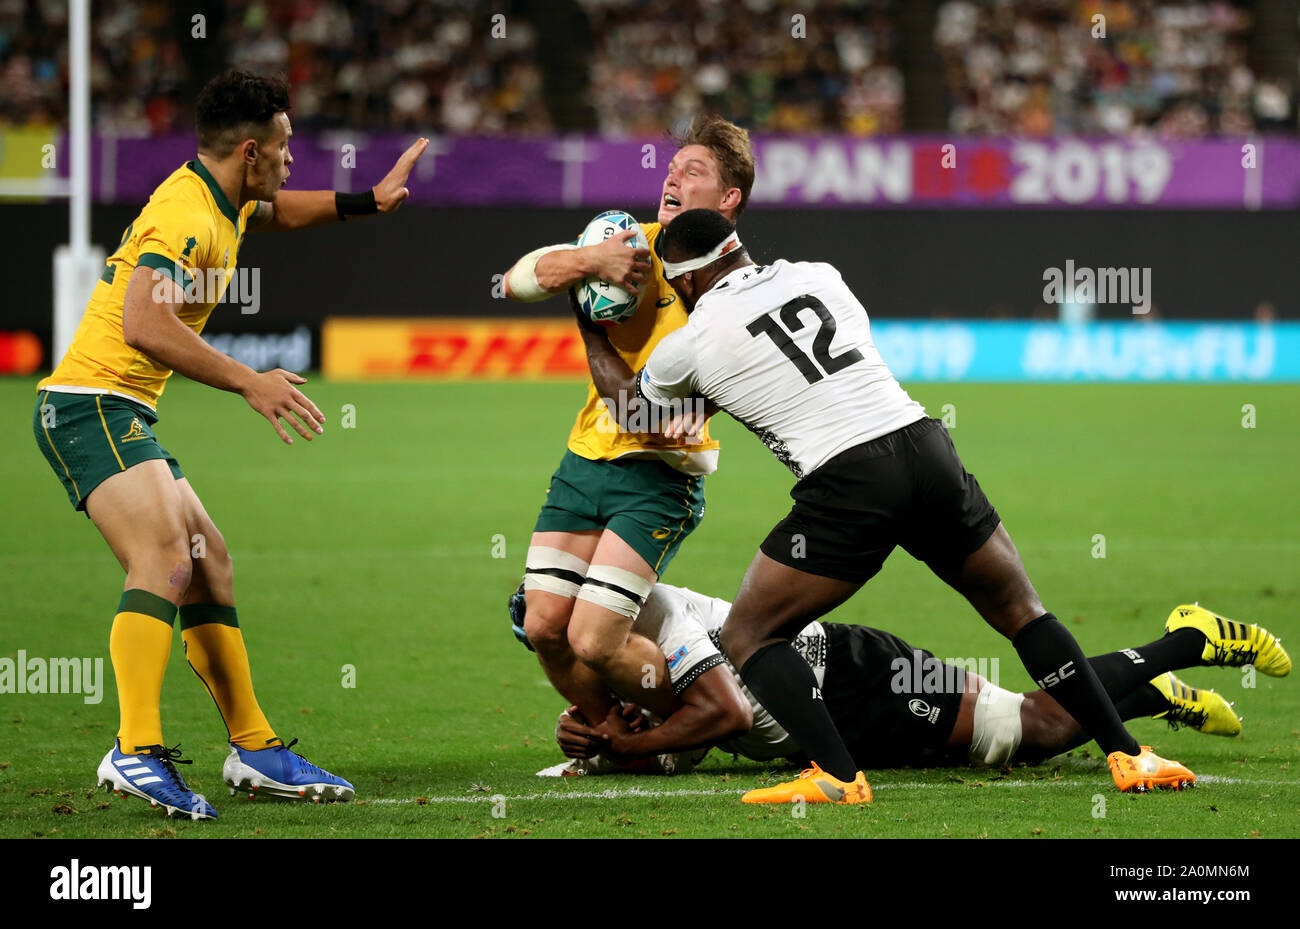 Fiji's Levani Botia (right) tackles Australia's Michael Hooper resulting in a yellow card during the 2019 Rugby World Cup Pool D match at Sapporo Dome. Stock Photo